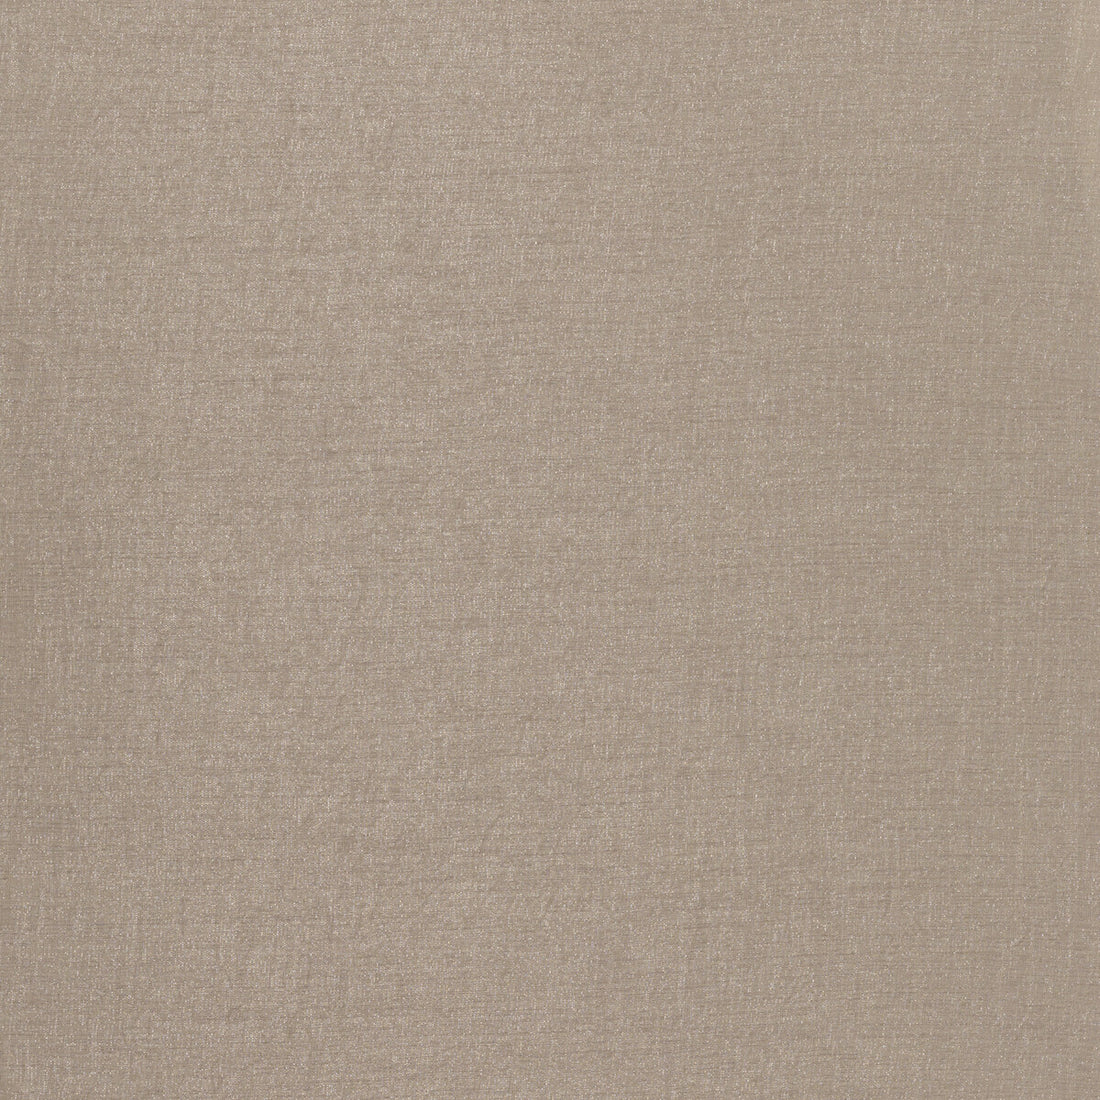 Aura fabric in blush color - pattern ED95012.440.0 - by Threads in the Meridian collection